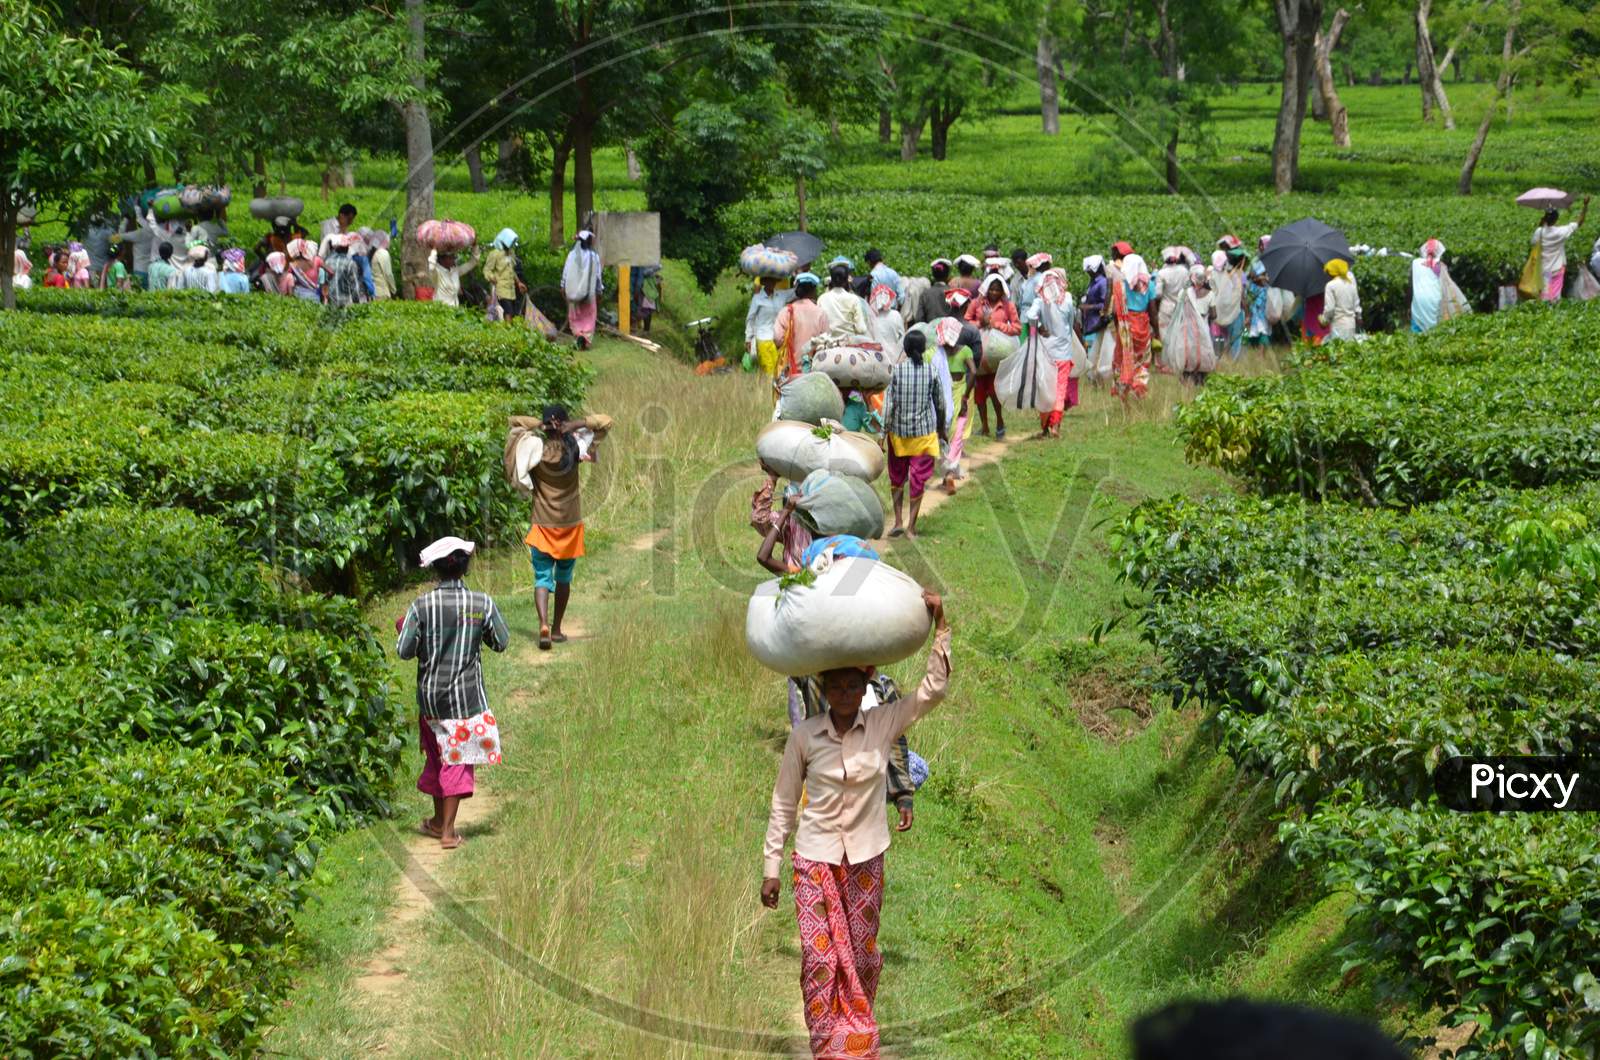 Workers Carrying Freshly Plucked Tea Leafs in an Tea Gardens in Assam